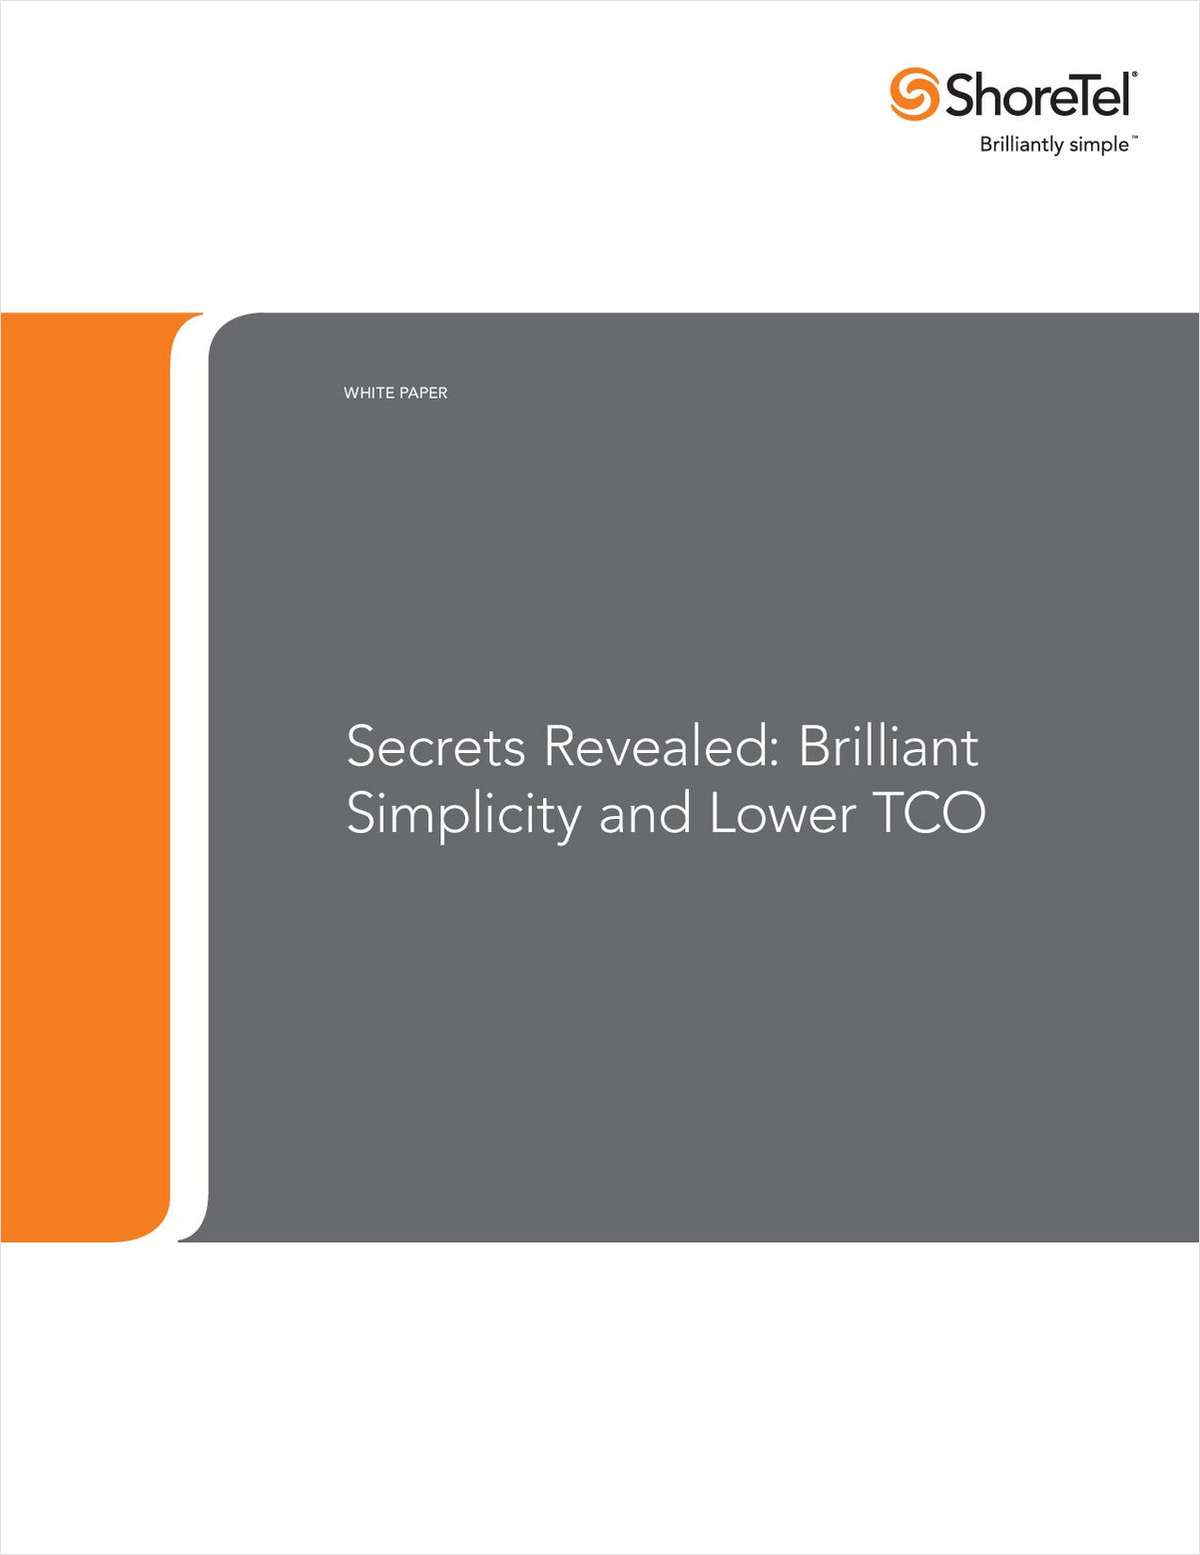 Secrets Revealed: Brilliant Simplicity and Lower Total Cost of Ownership